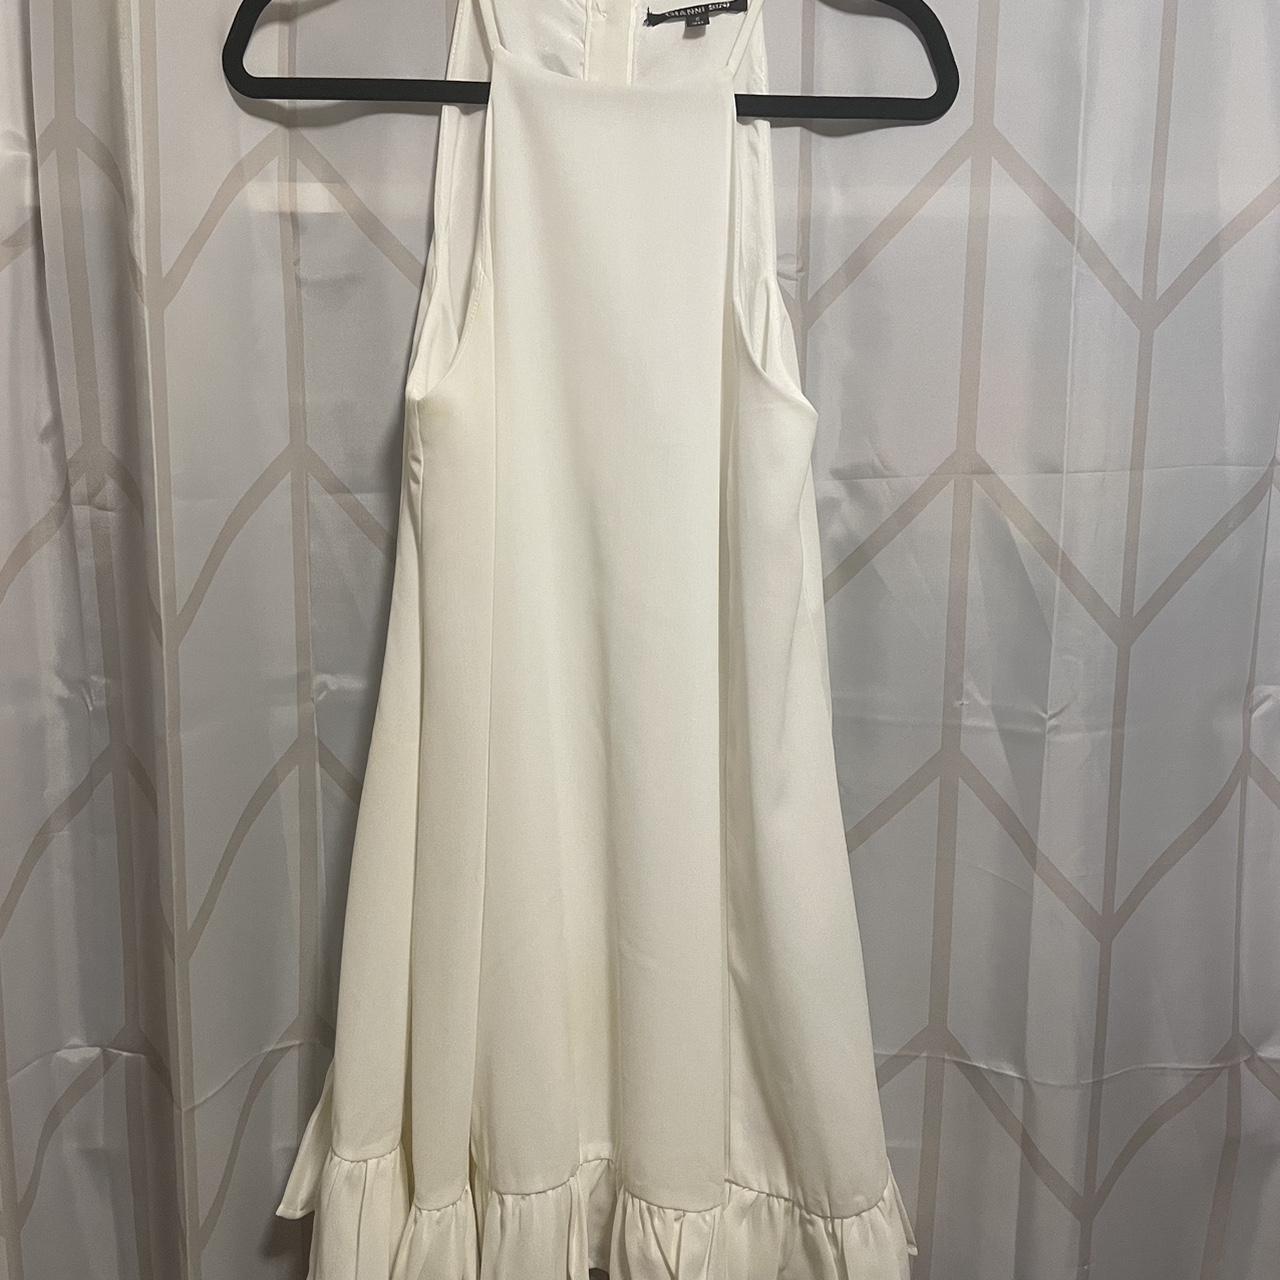 gianni bini white baby doll dress buttons up the... - Depop